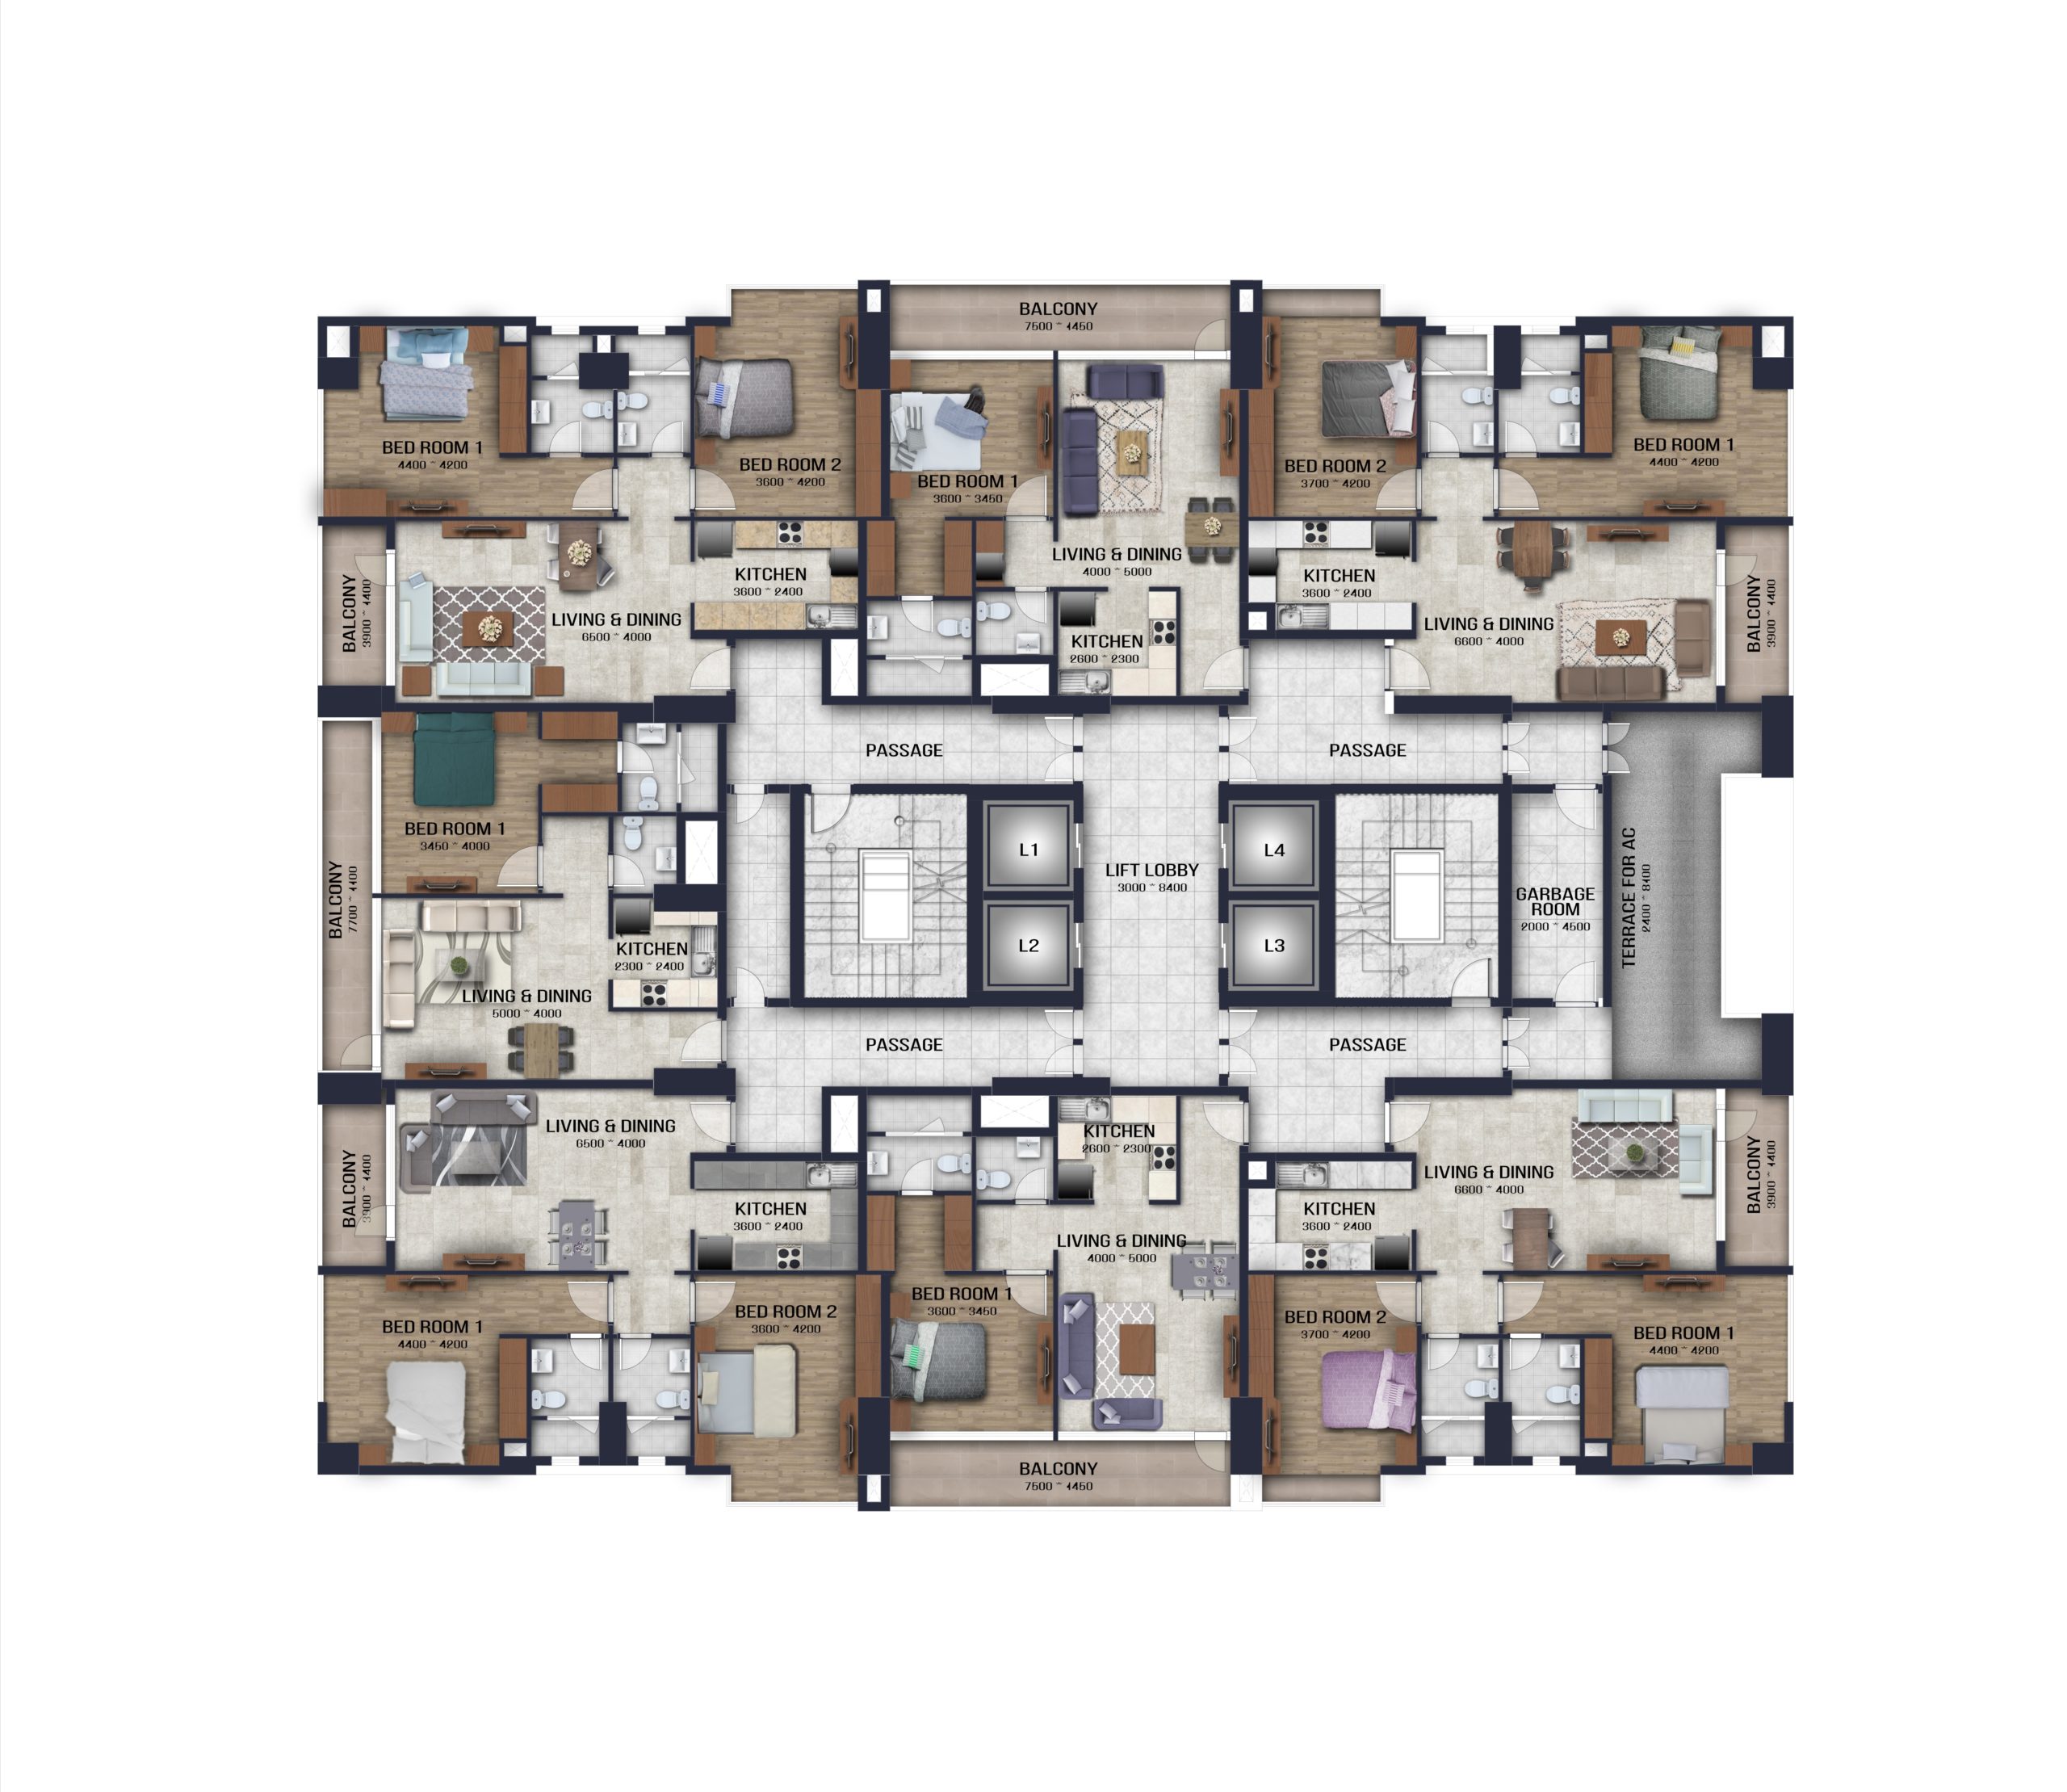 A Memaar floor plan of an apartment with two bedrooms and two bathrooms.